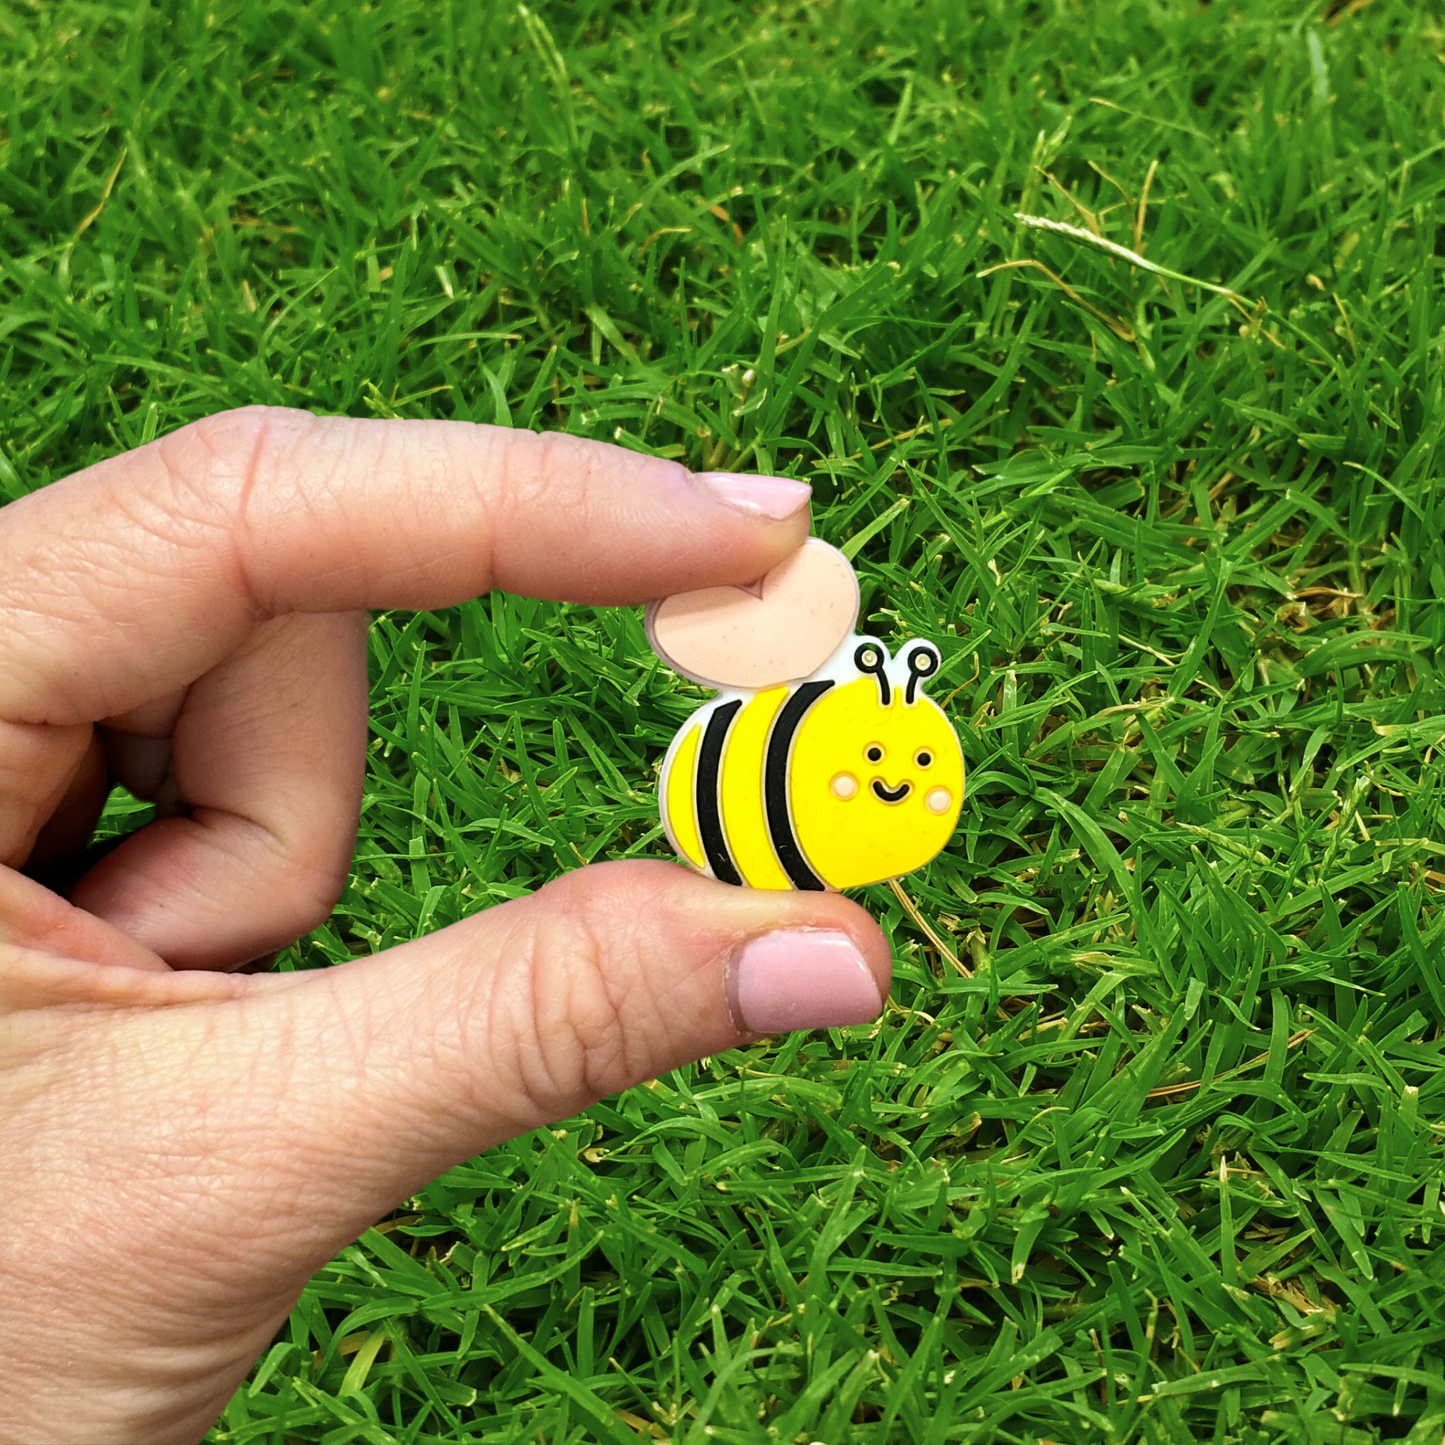 Bumble Bee Silicone Focal Bead | 12 Pack